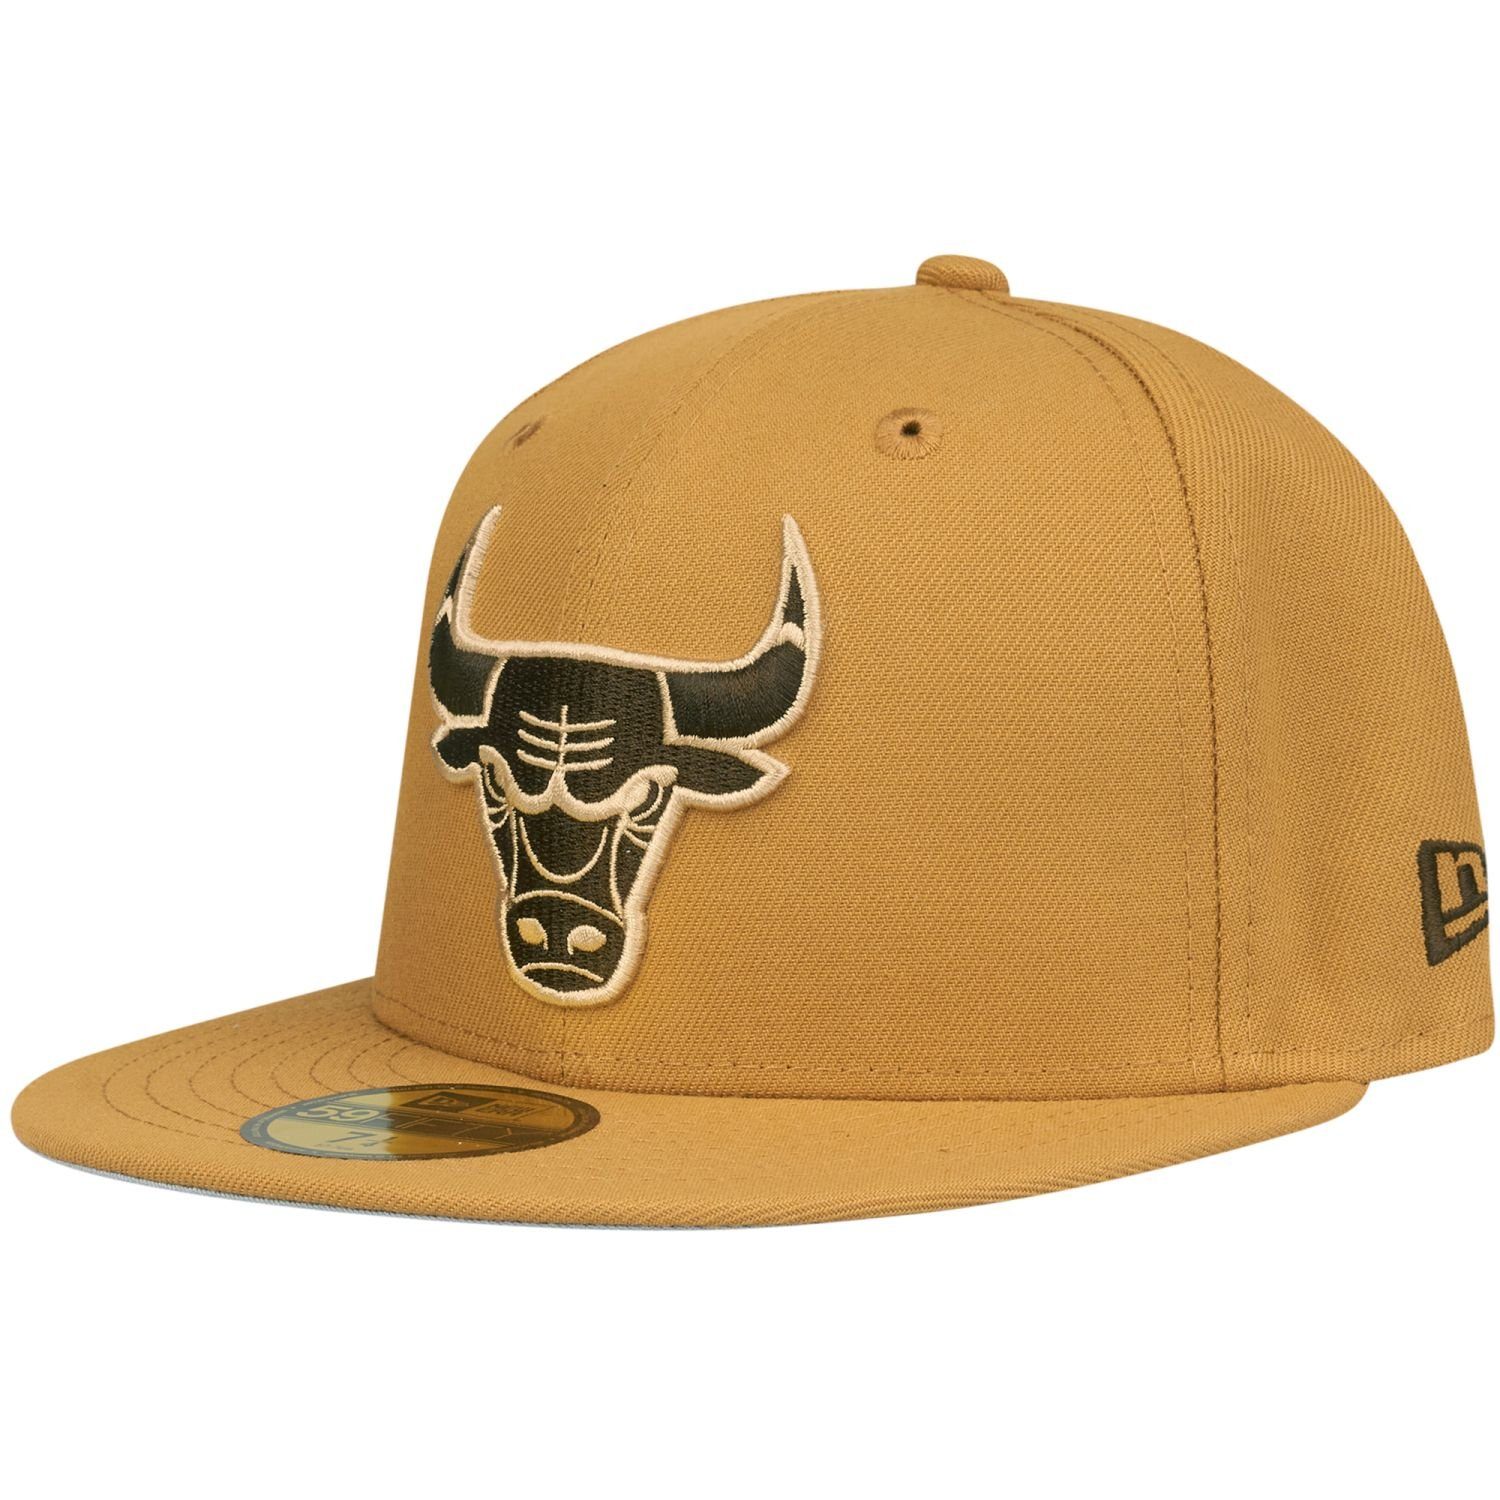 New Bulls Chicago 59Fifty Era Cap NBA Fitted